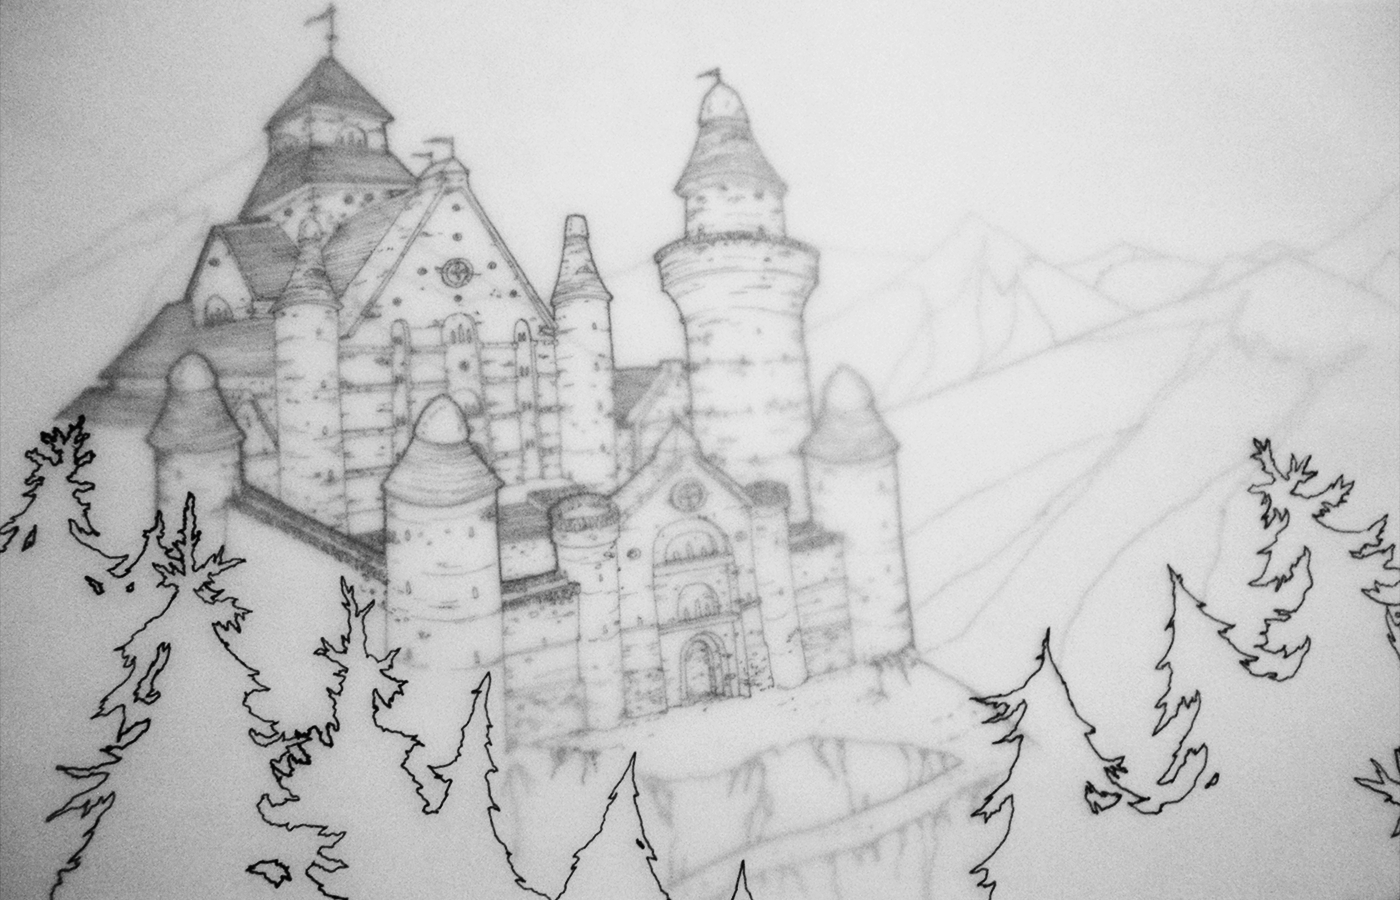 Grimm Brothers grimm fairy tale castles Student work